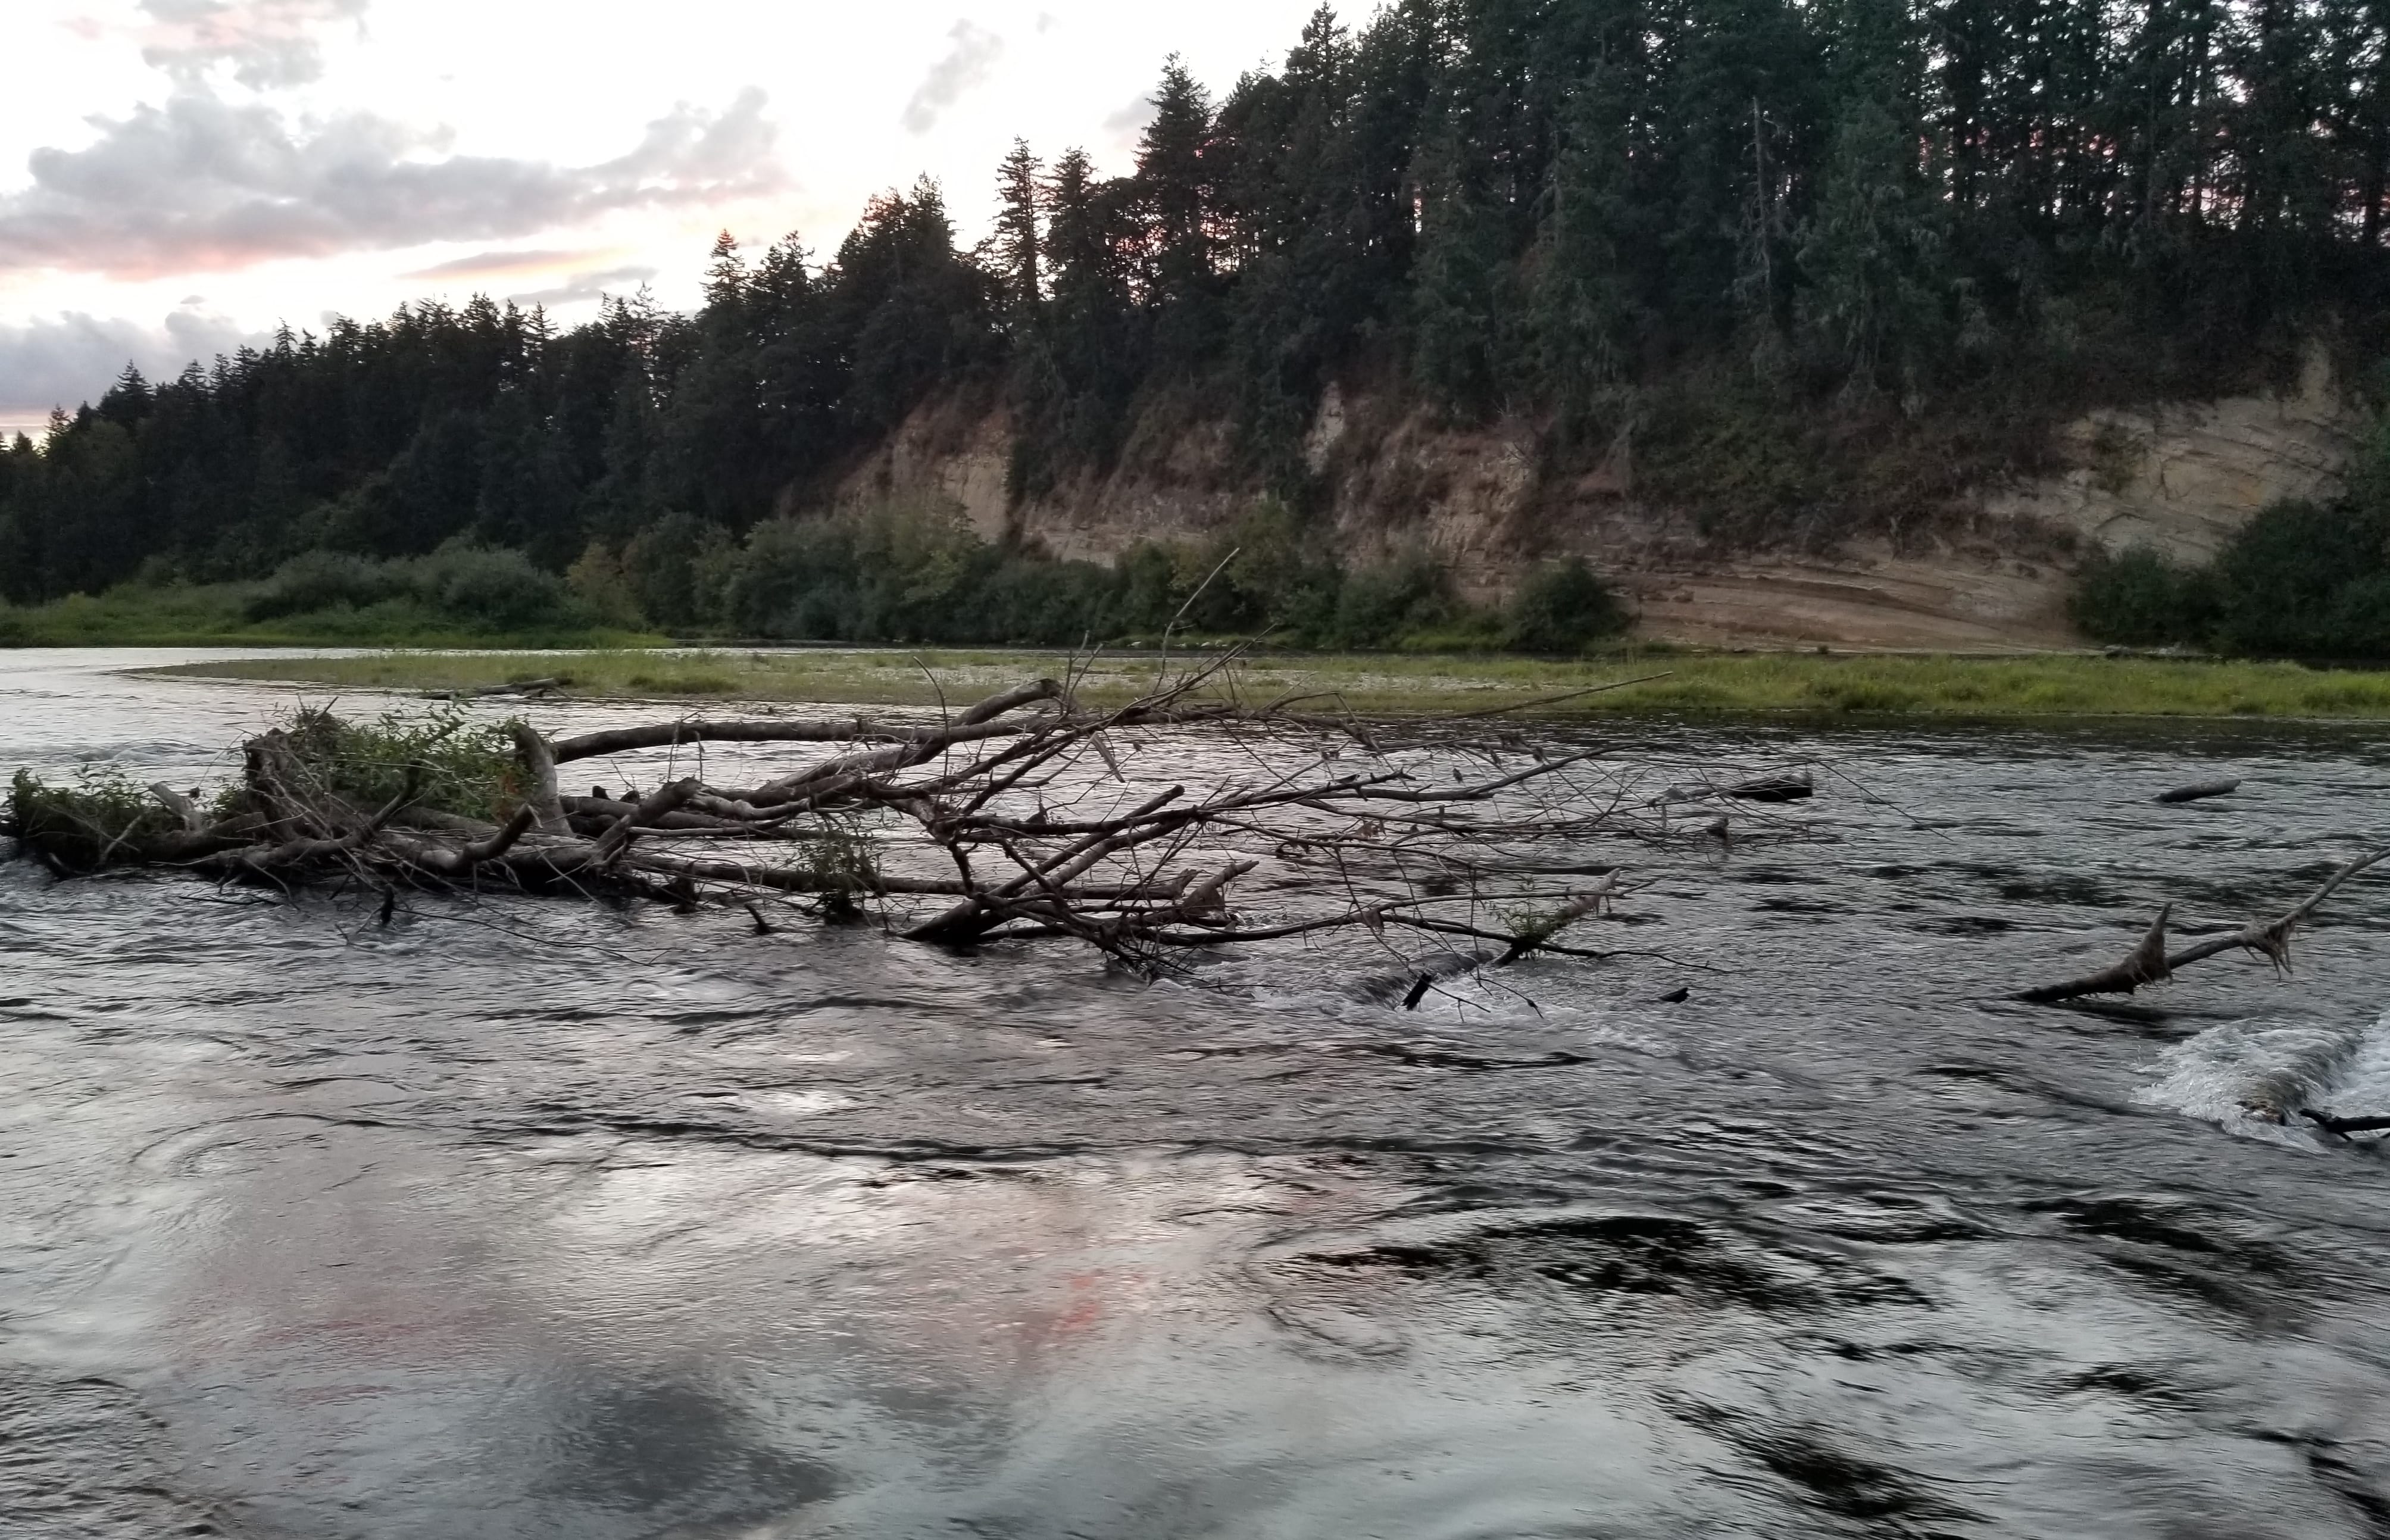 The Polk County, Ore., Sheriff's Office released this photo of a root ball snag in the Willamette River where a Vancouver woman went missing Saturday.